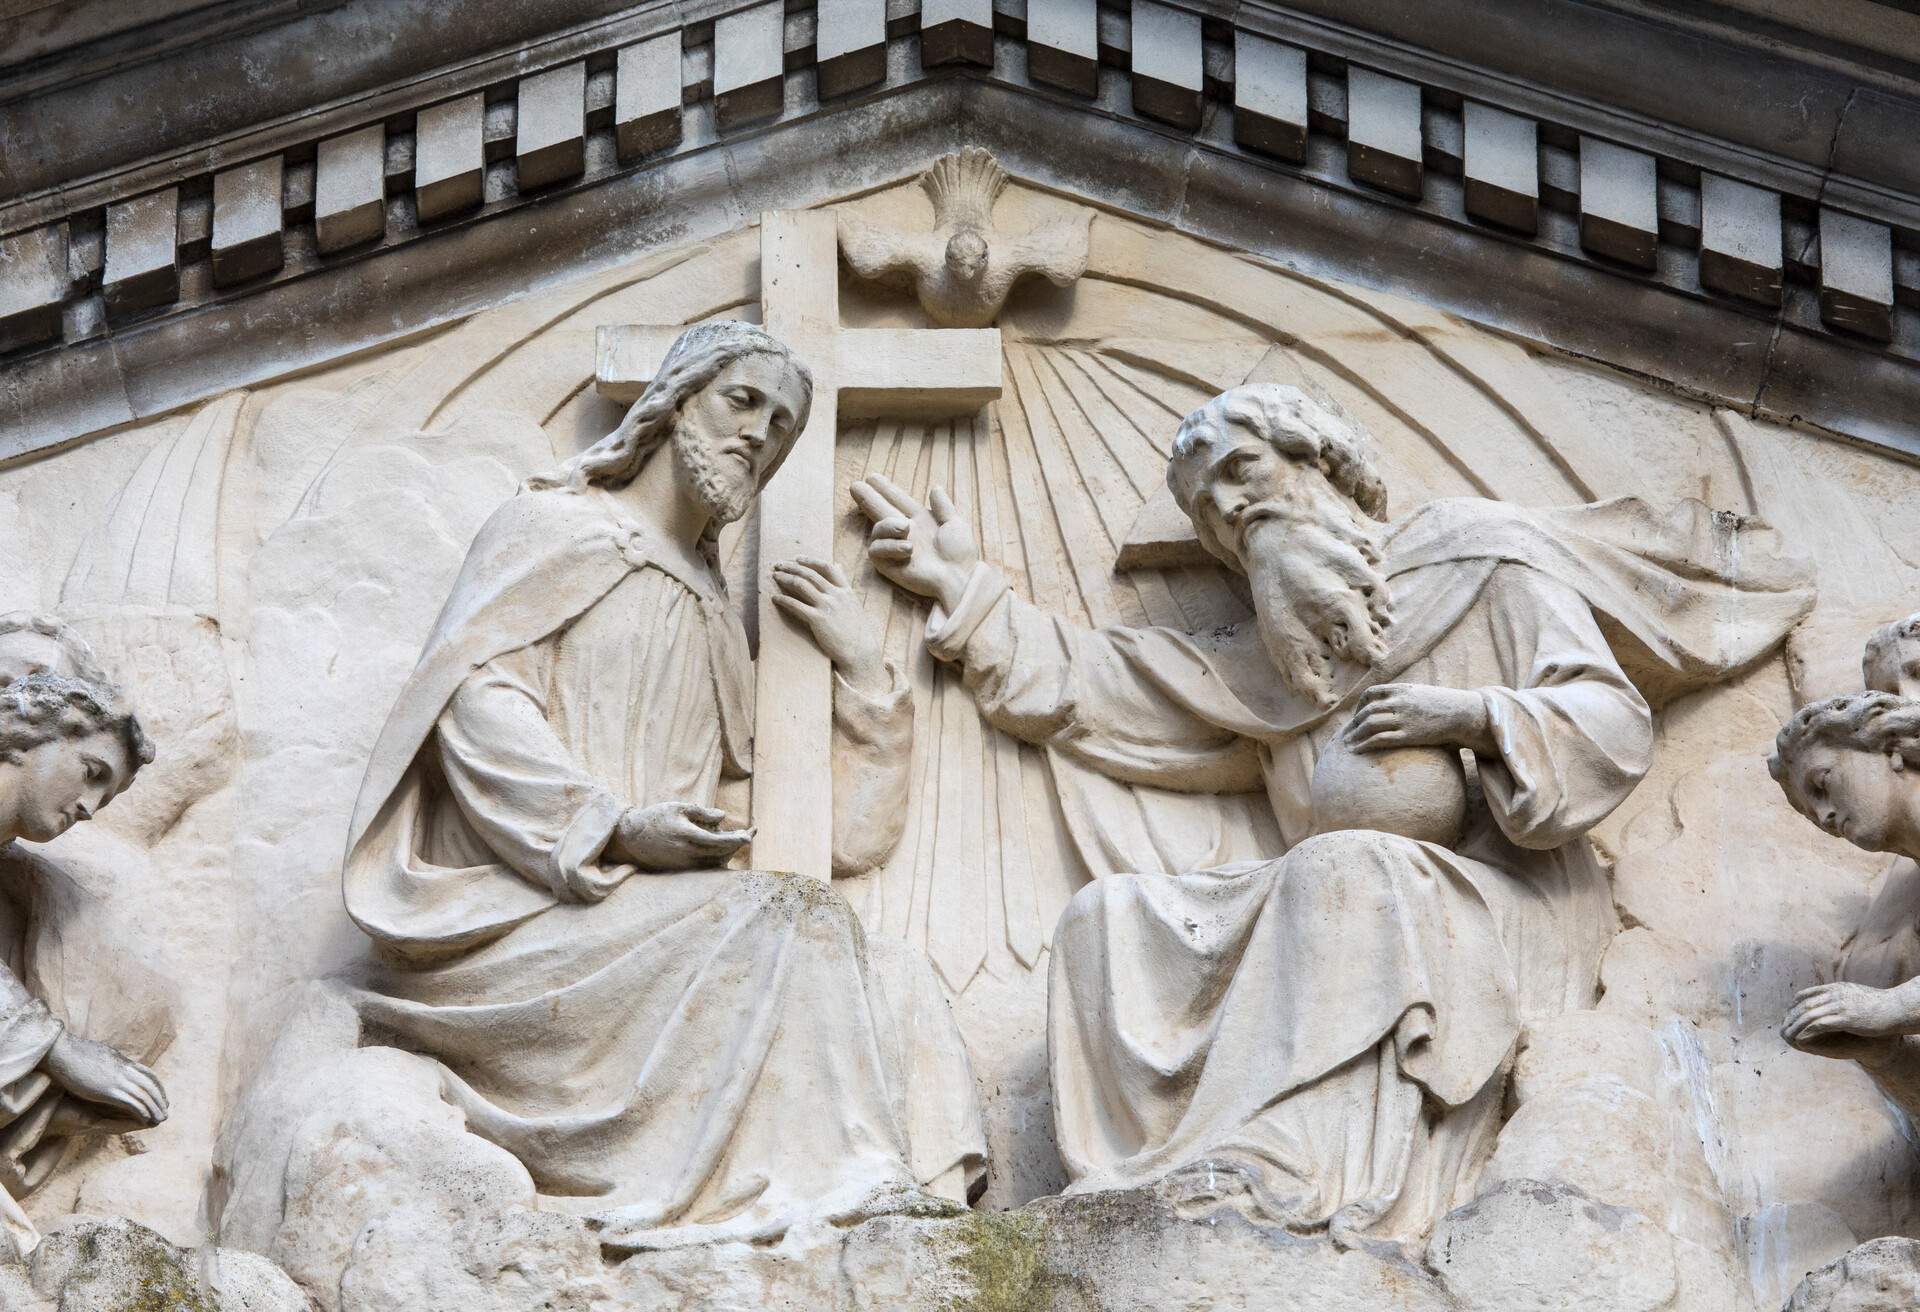 A close-up of the intricate sculpturing on the exterior of the Cathedral of the Most Holy Trinity in the city of Waterford, Republic of Ireland.